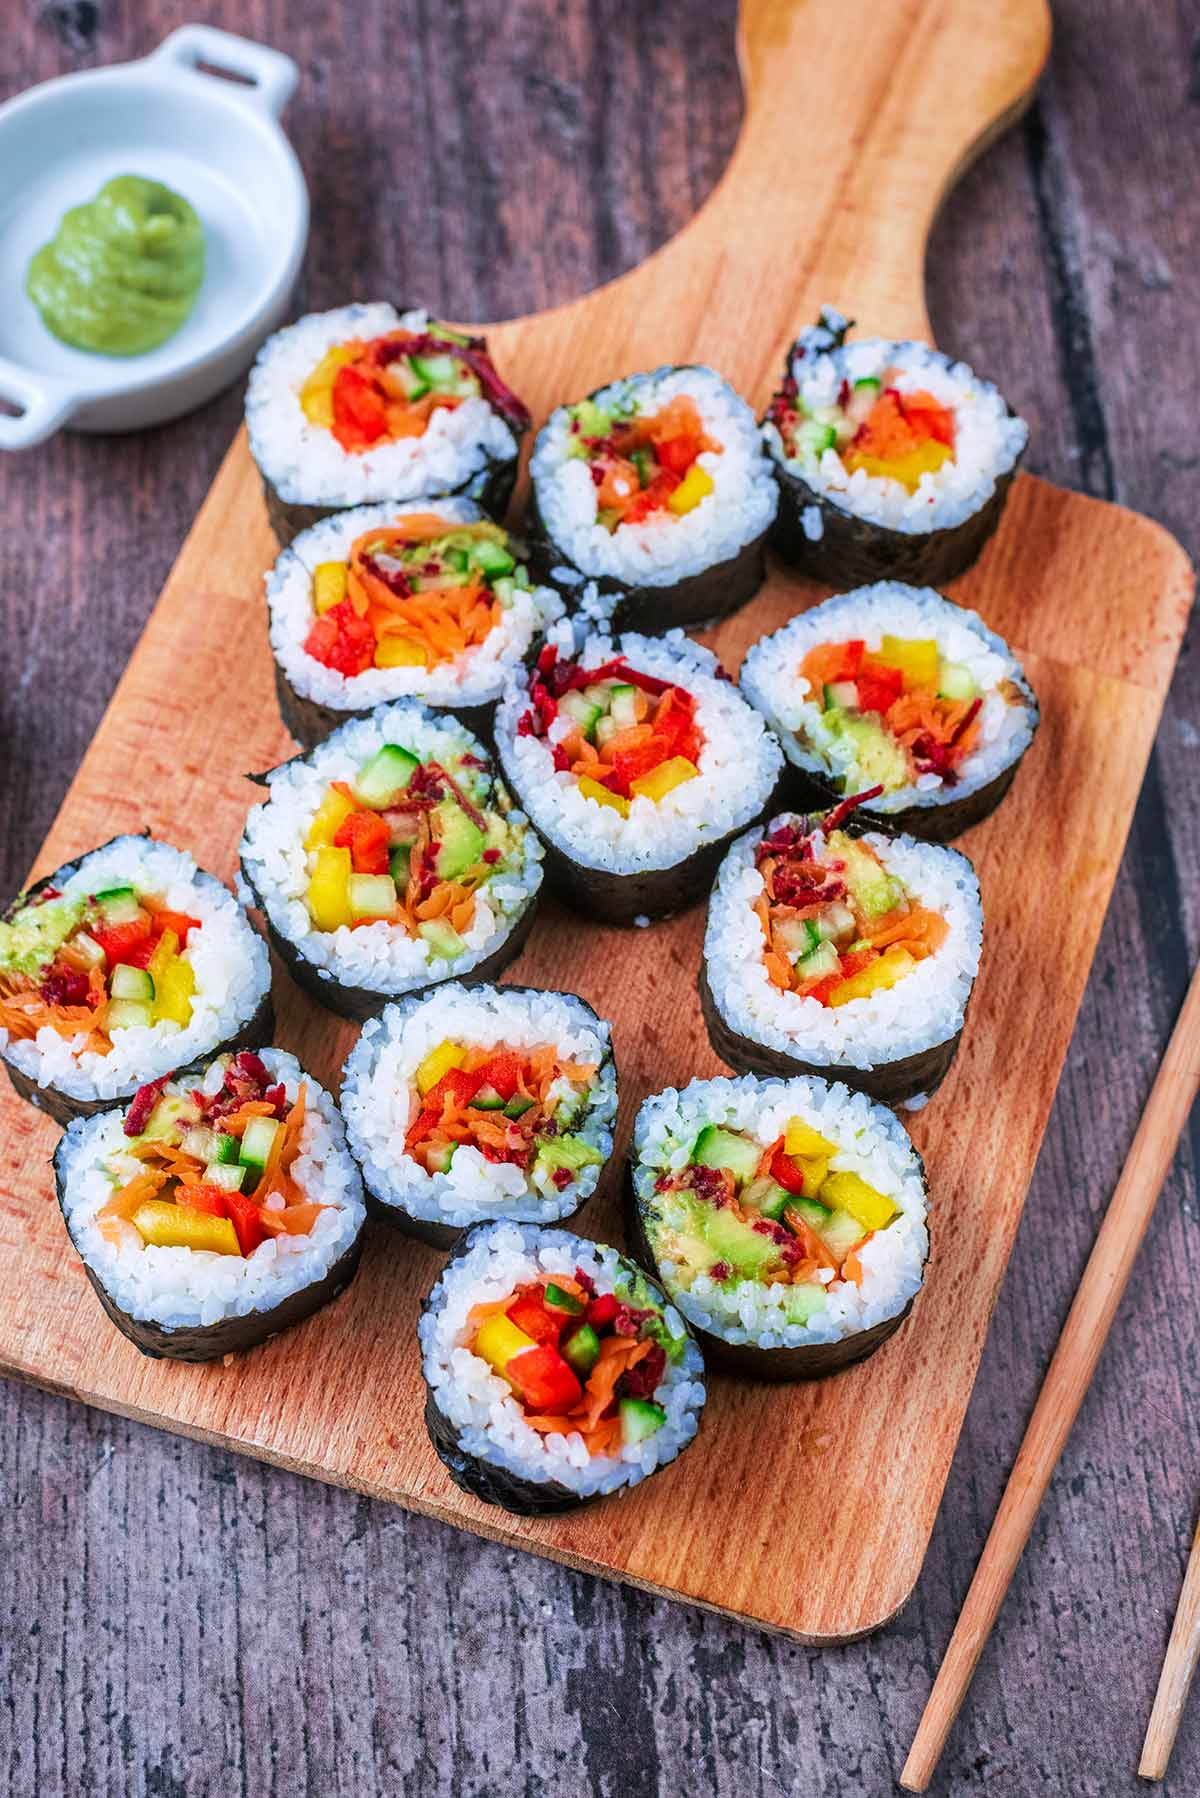 Colourful sushi rolls on a wooden serving board.